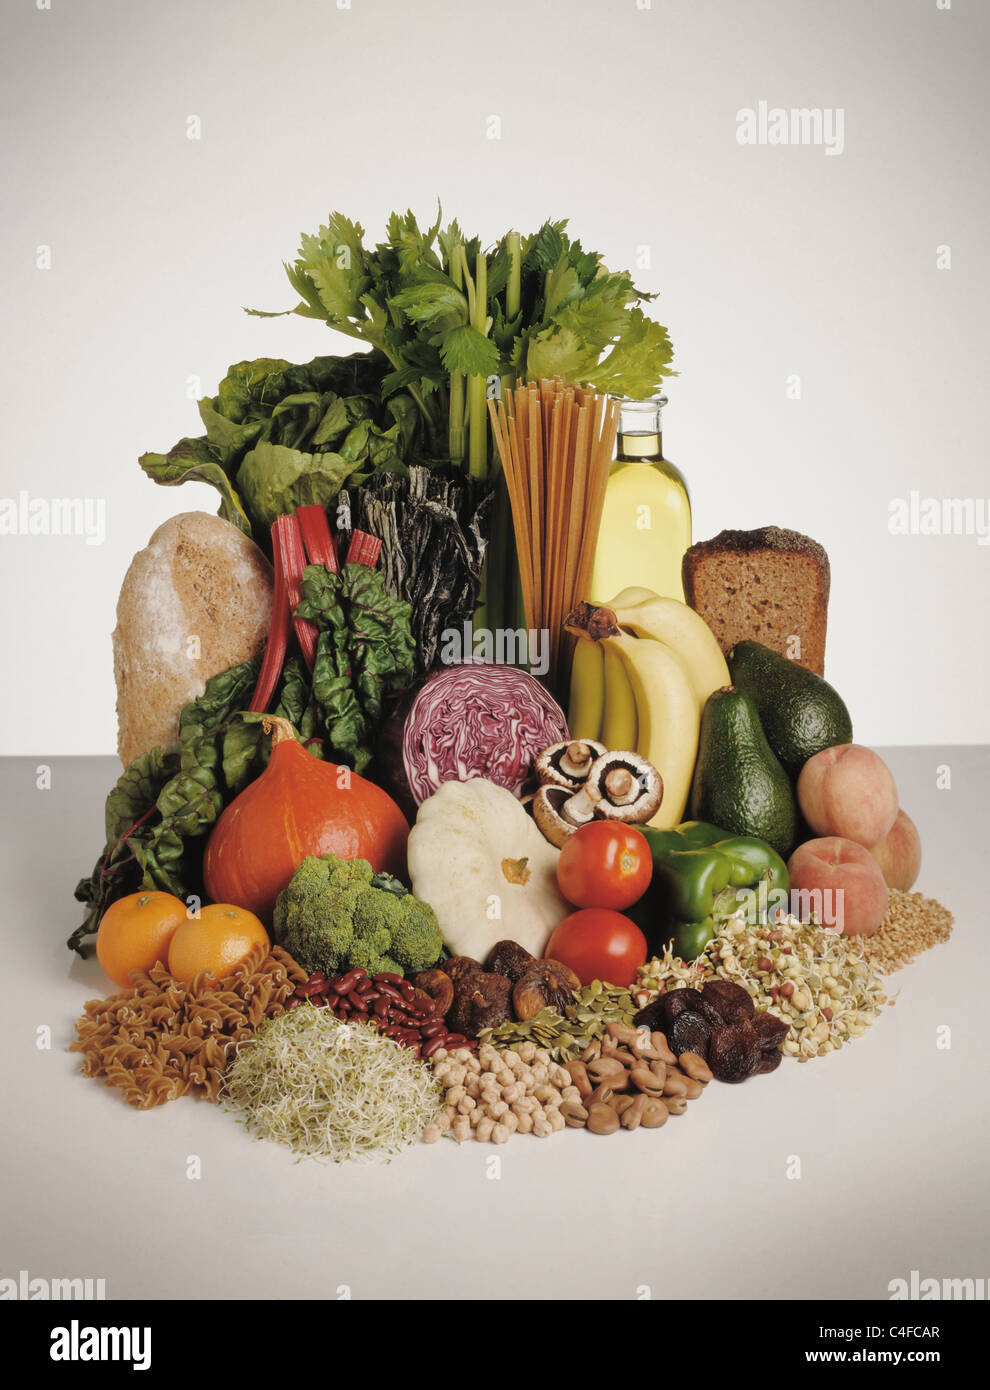 Display of healthy foods, fruits, vegetables, pulses, pasta and bread. Stock Photo